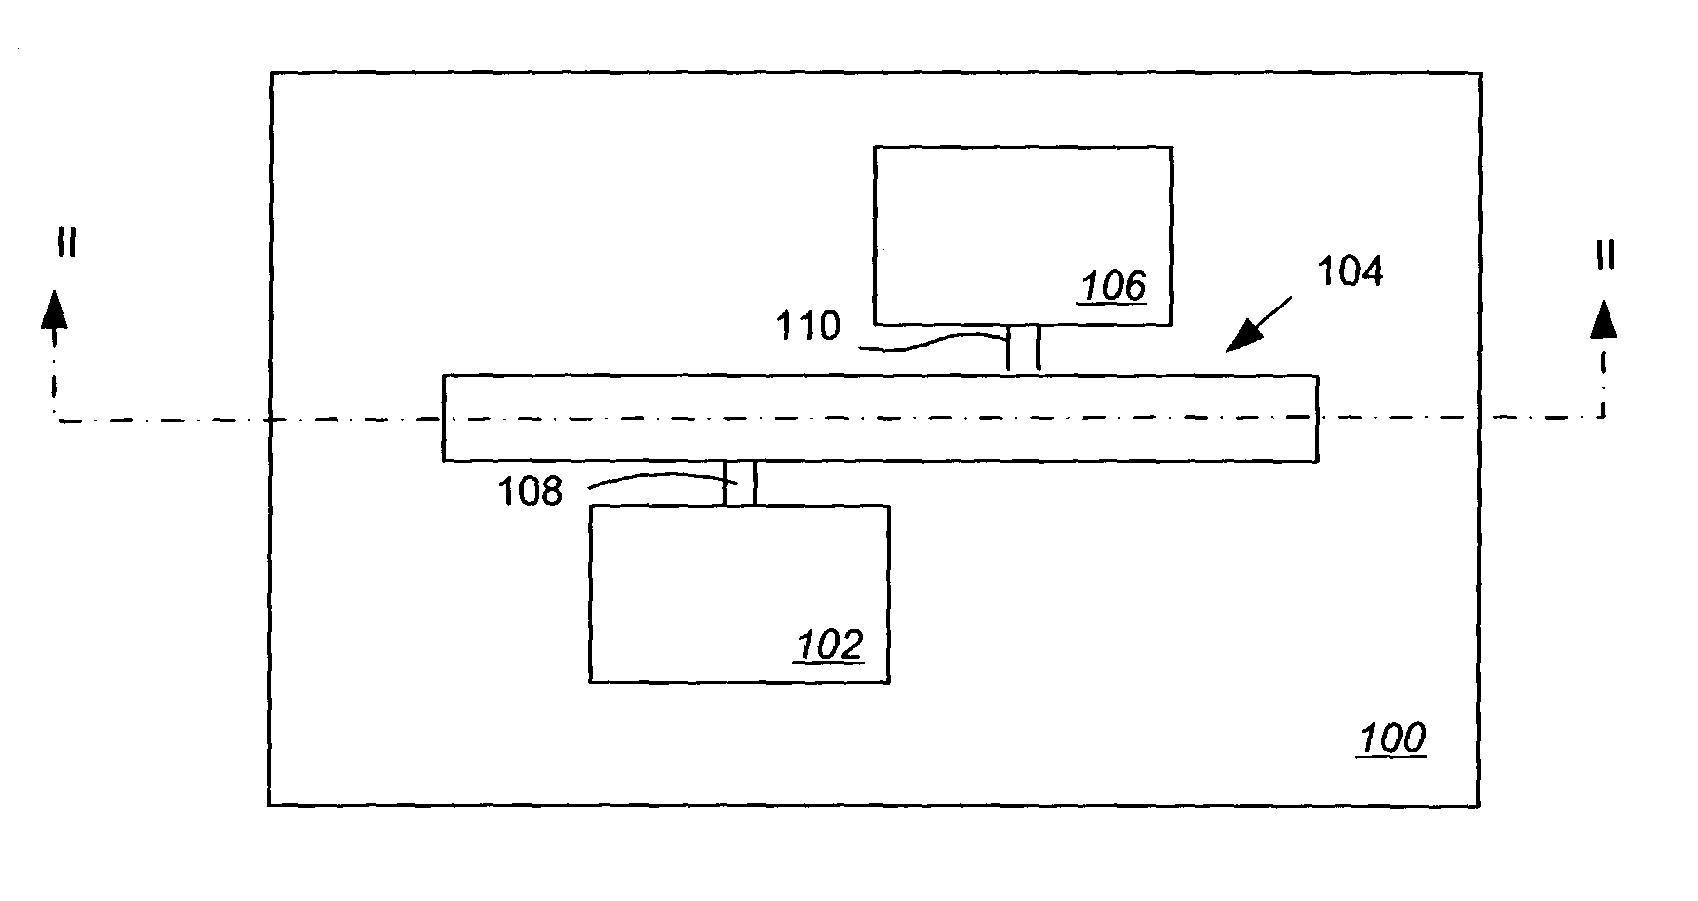 Reducing oxides on a switching fluid in a fluid-based switch